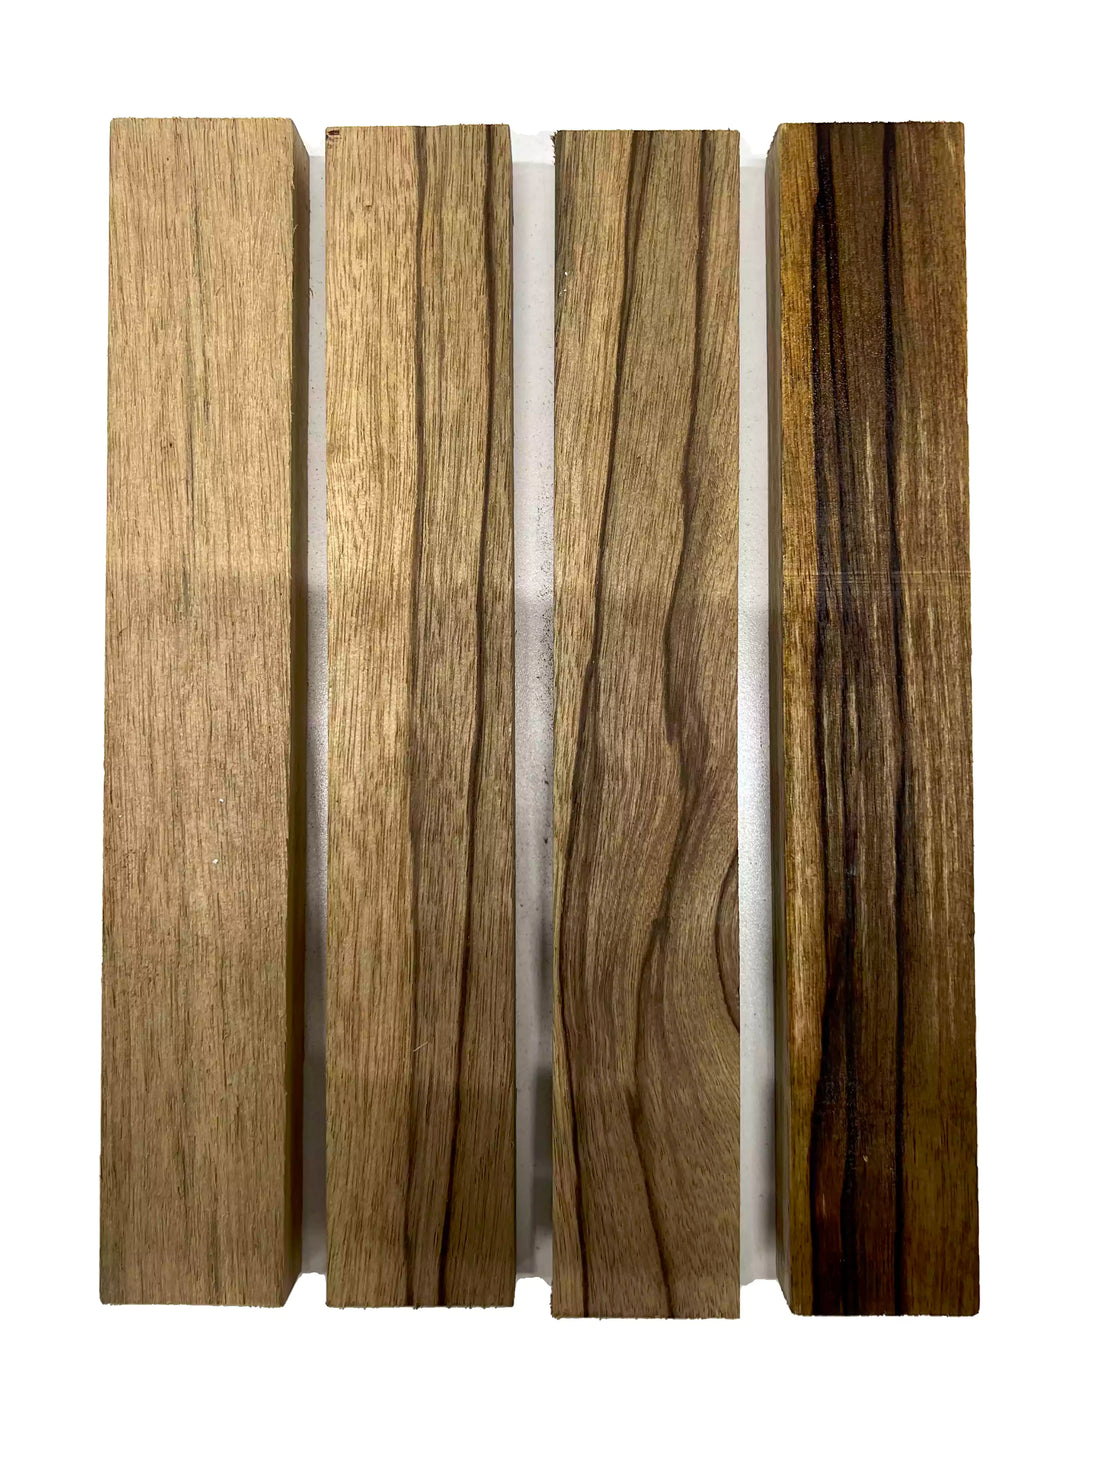 Pack of 4, Black Limba Thin Stock Three Dimensional Lumber Board 12&quot; x 2&quot; x 3/4&quot; 